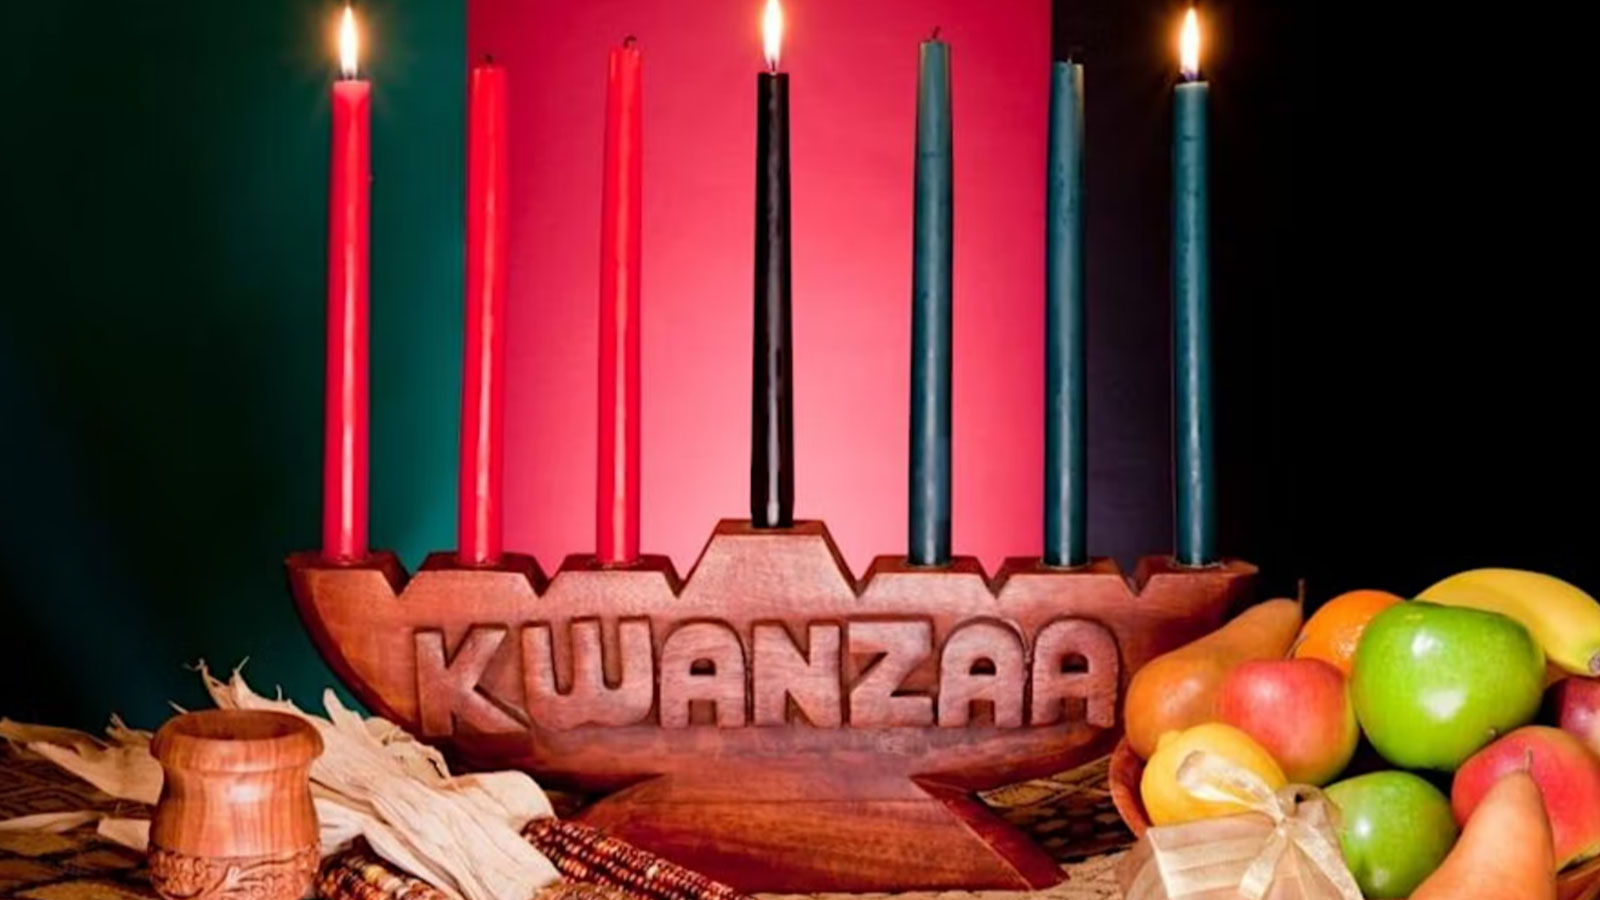 50 Kwanzaa greetings to honor the seven principles and celebrate Pan-African culture